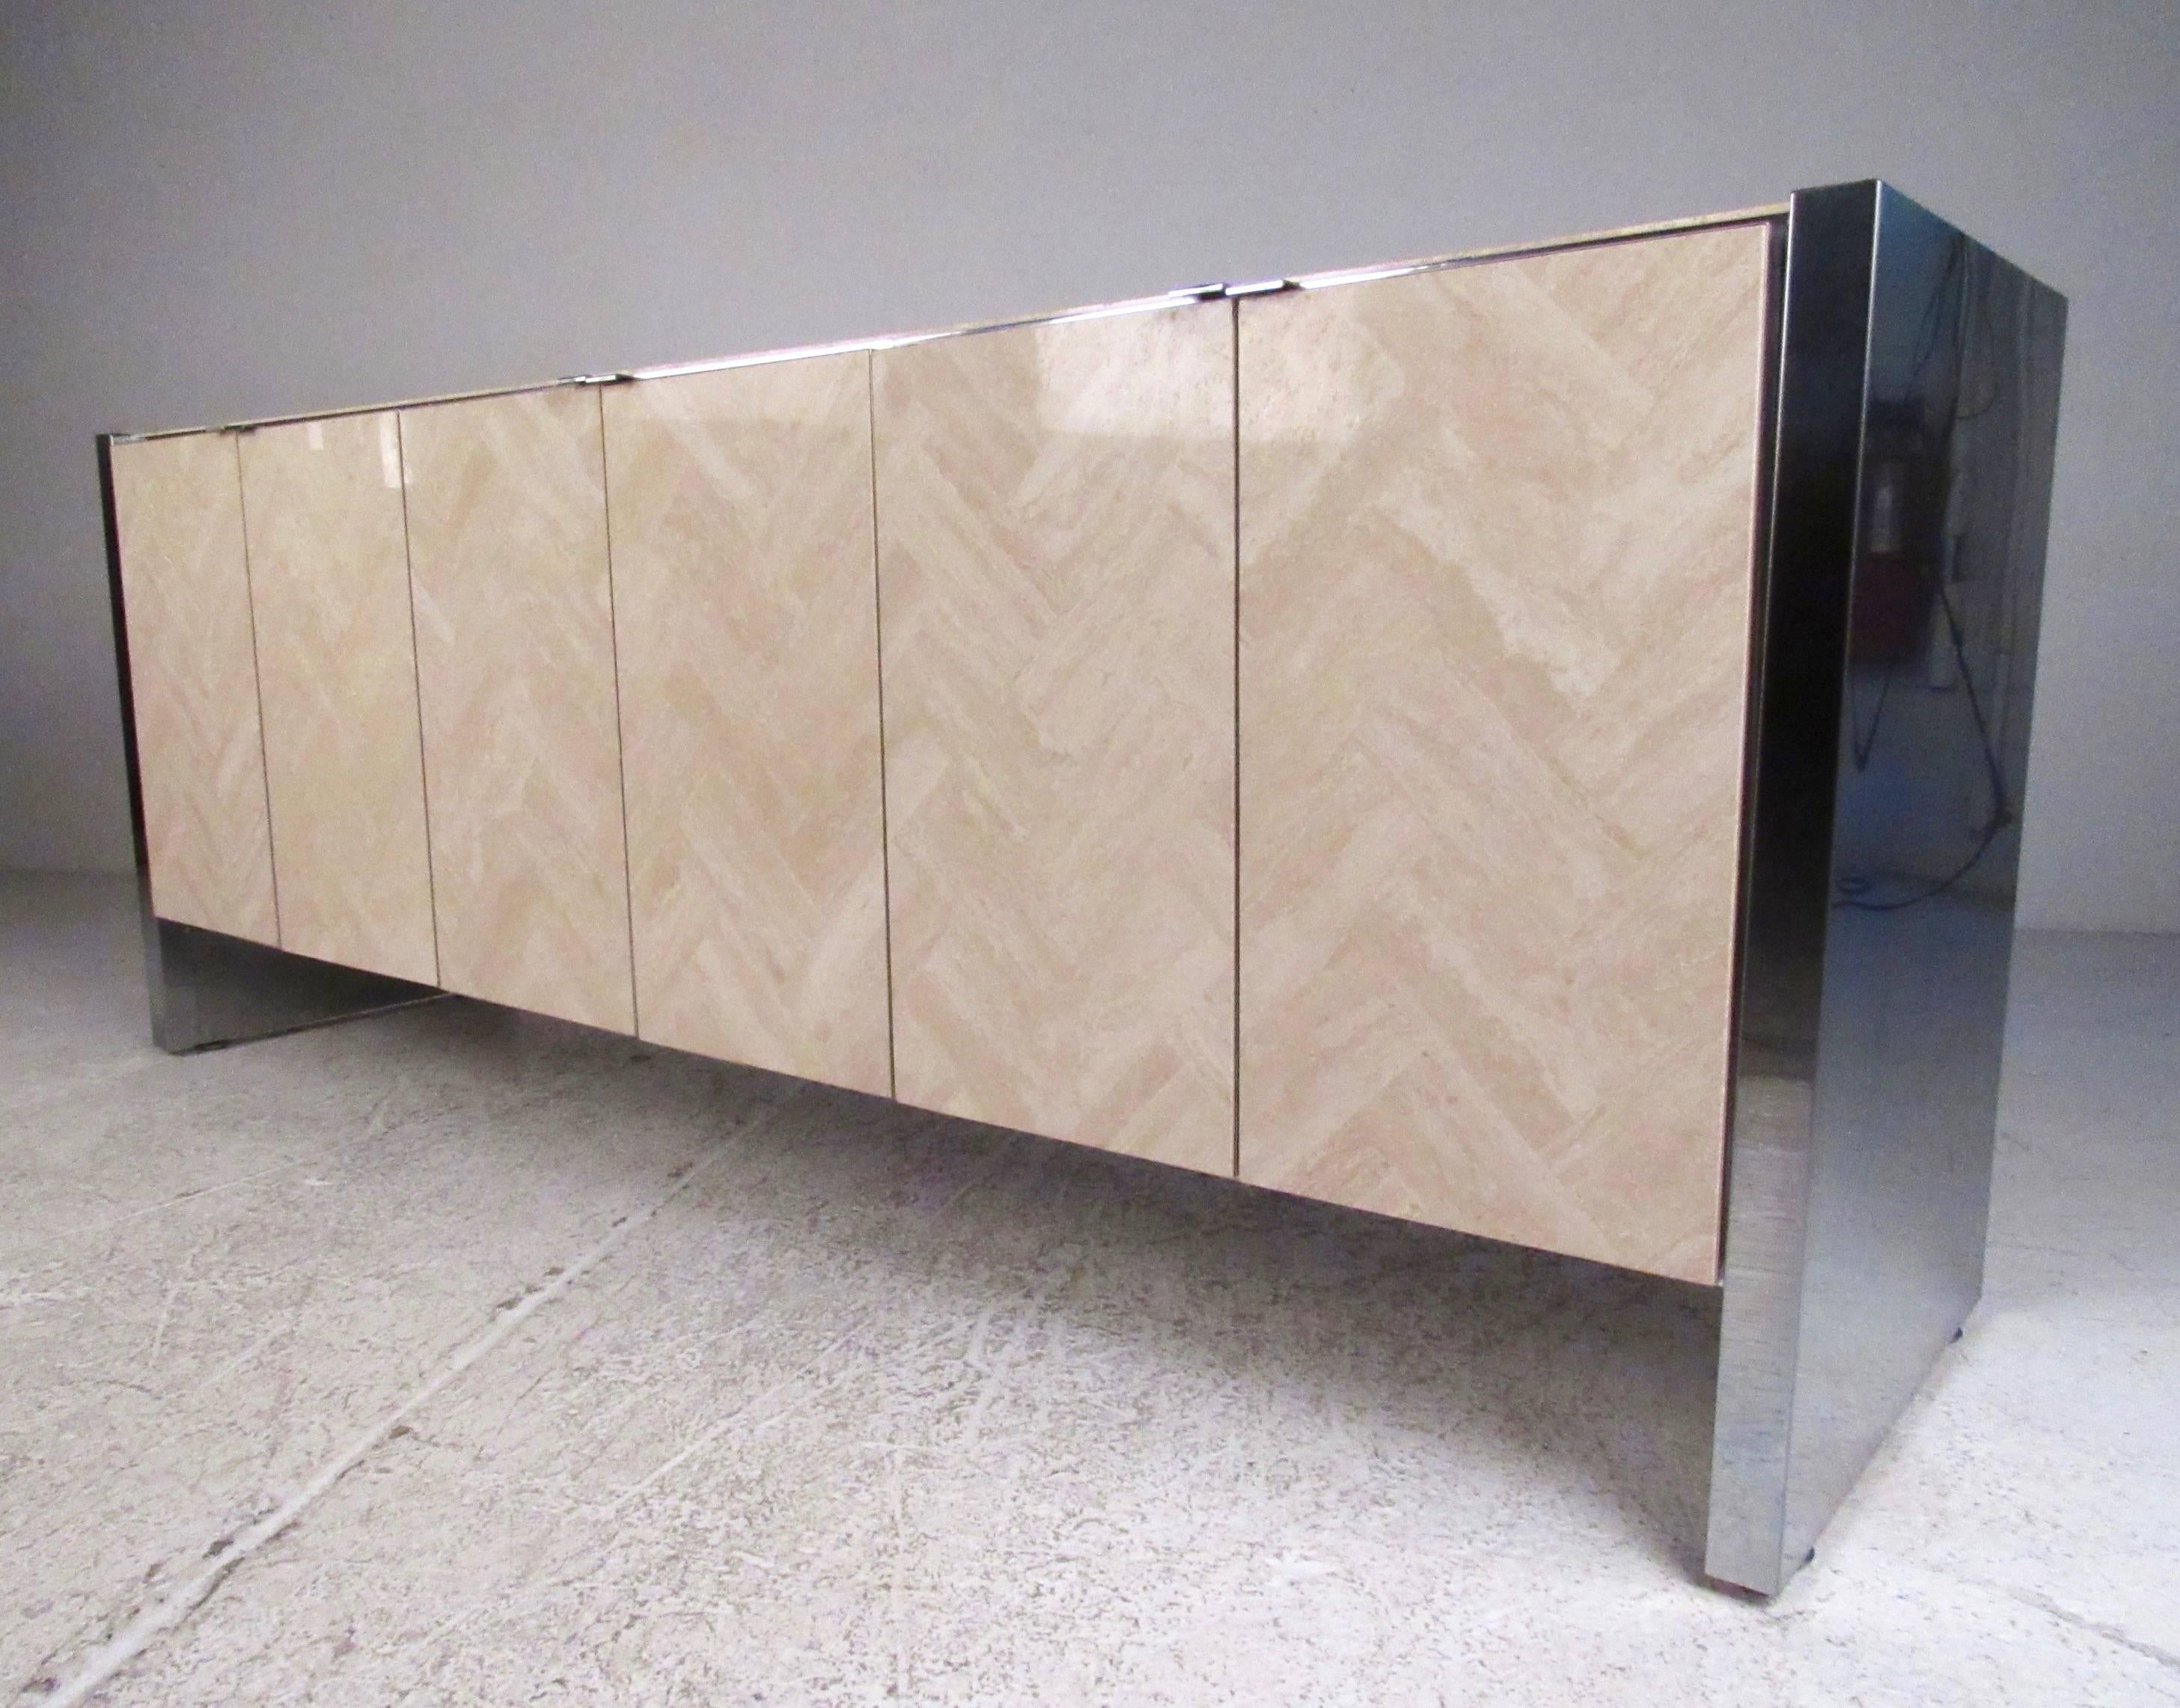 This stylish vintage credenza features impressive travertine finish matched with vintage Ello style chrome trim. Spacious interior cabinets offer plenty of office or dining room storage without sacrificing style. Mid-Century Modern sideboard perfect